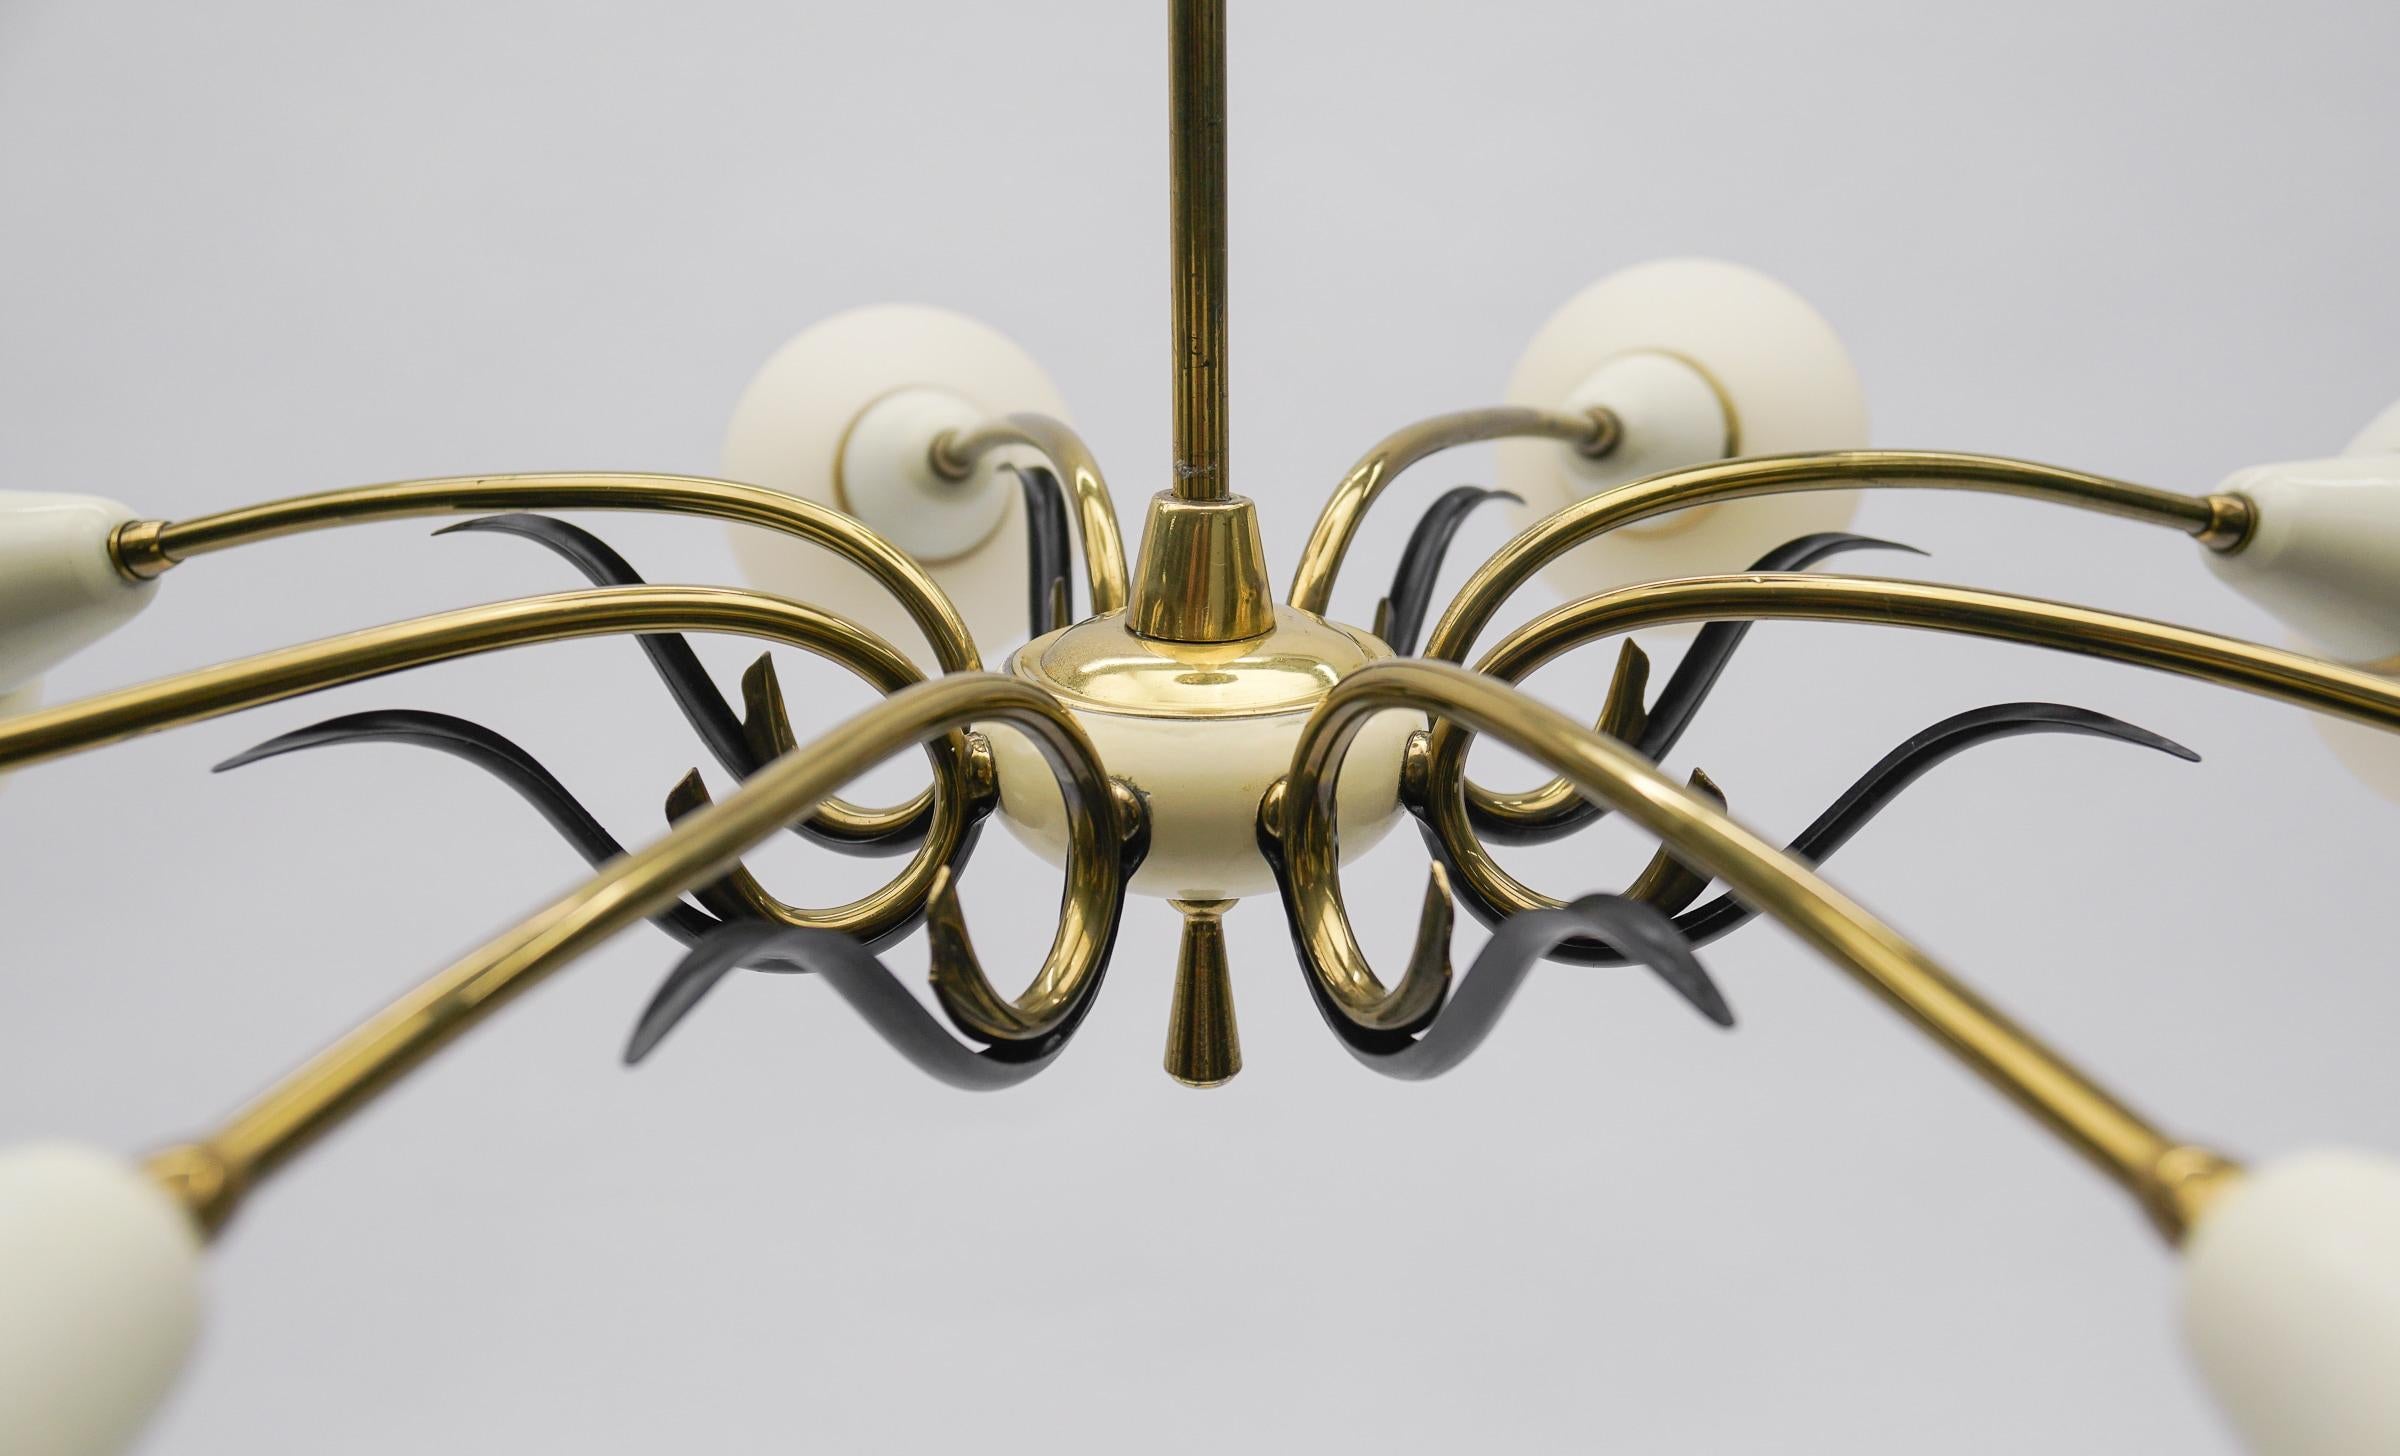 Ceiling 8-Light Sputnik Lamp in the Style of Arteluce, Italy 1950s For Sale 2